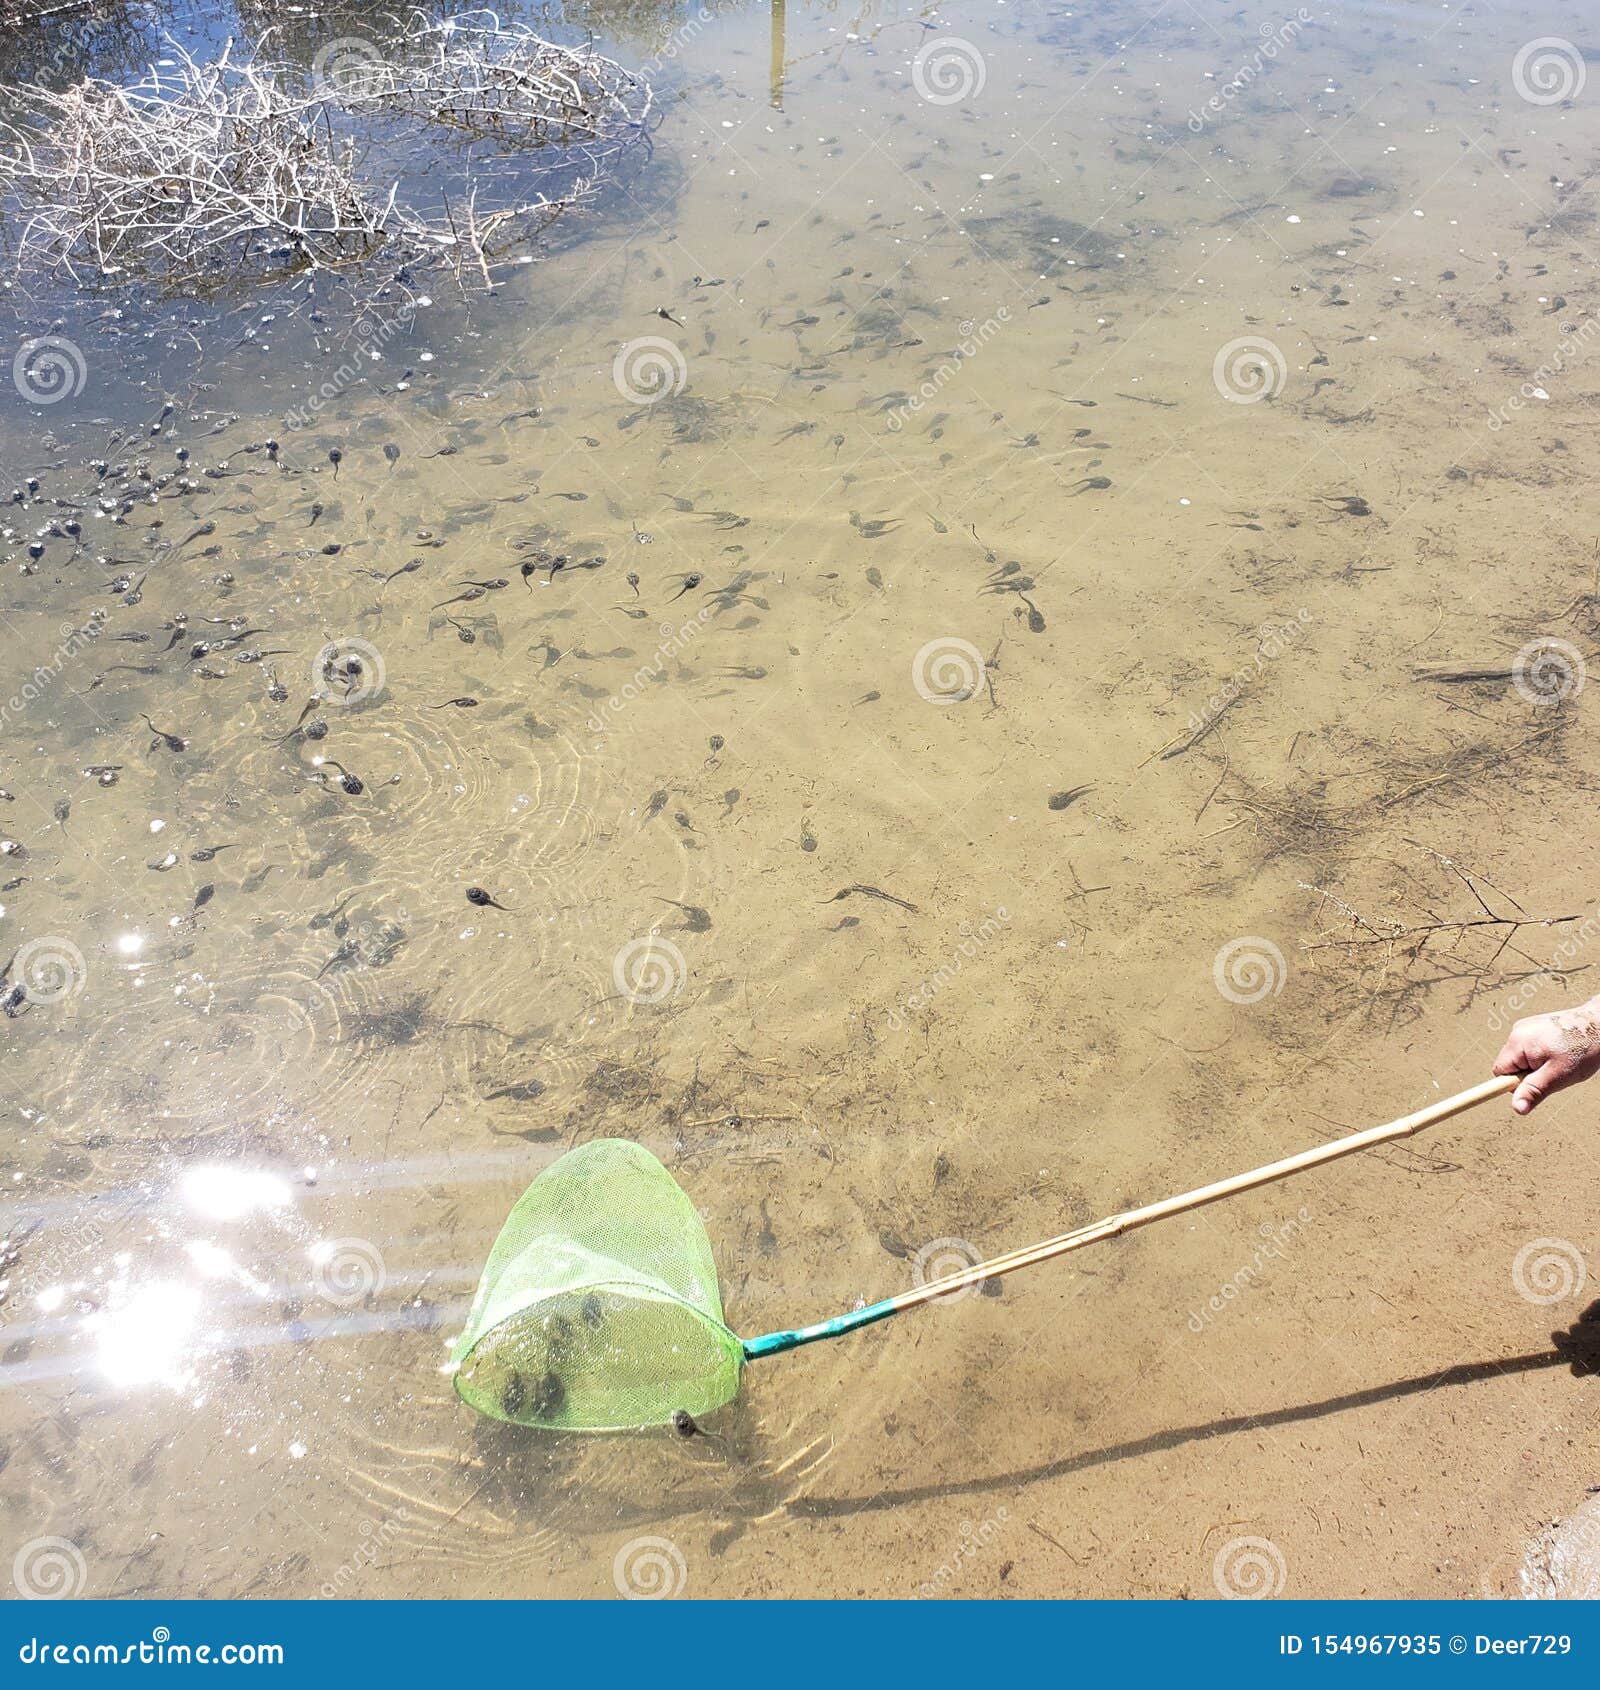 Catching Tadpoles with a Net Stock Image - Image of swim, crowded: 154967935